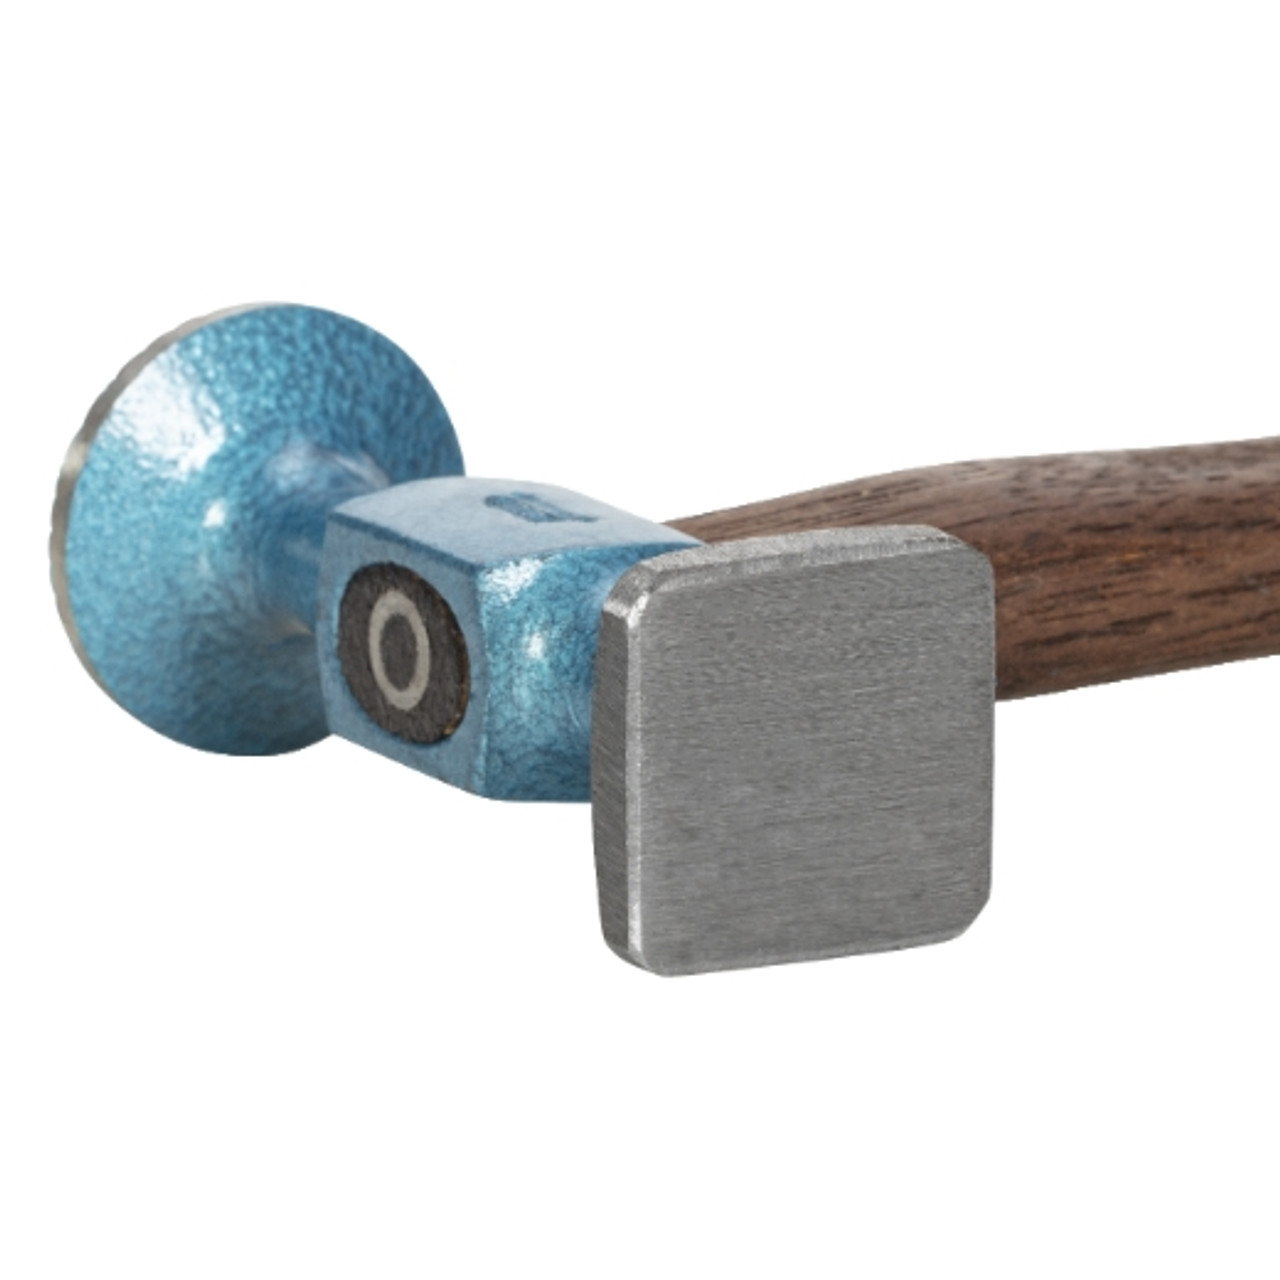 Picard Short Pattern Planishing Hammer 380gm(13oz), 40mm round CHECKED face and 35mm square smooth face, wood handle.